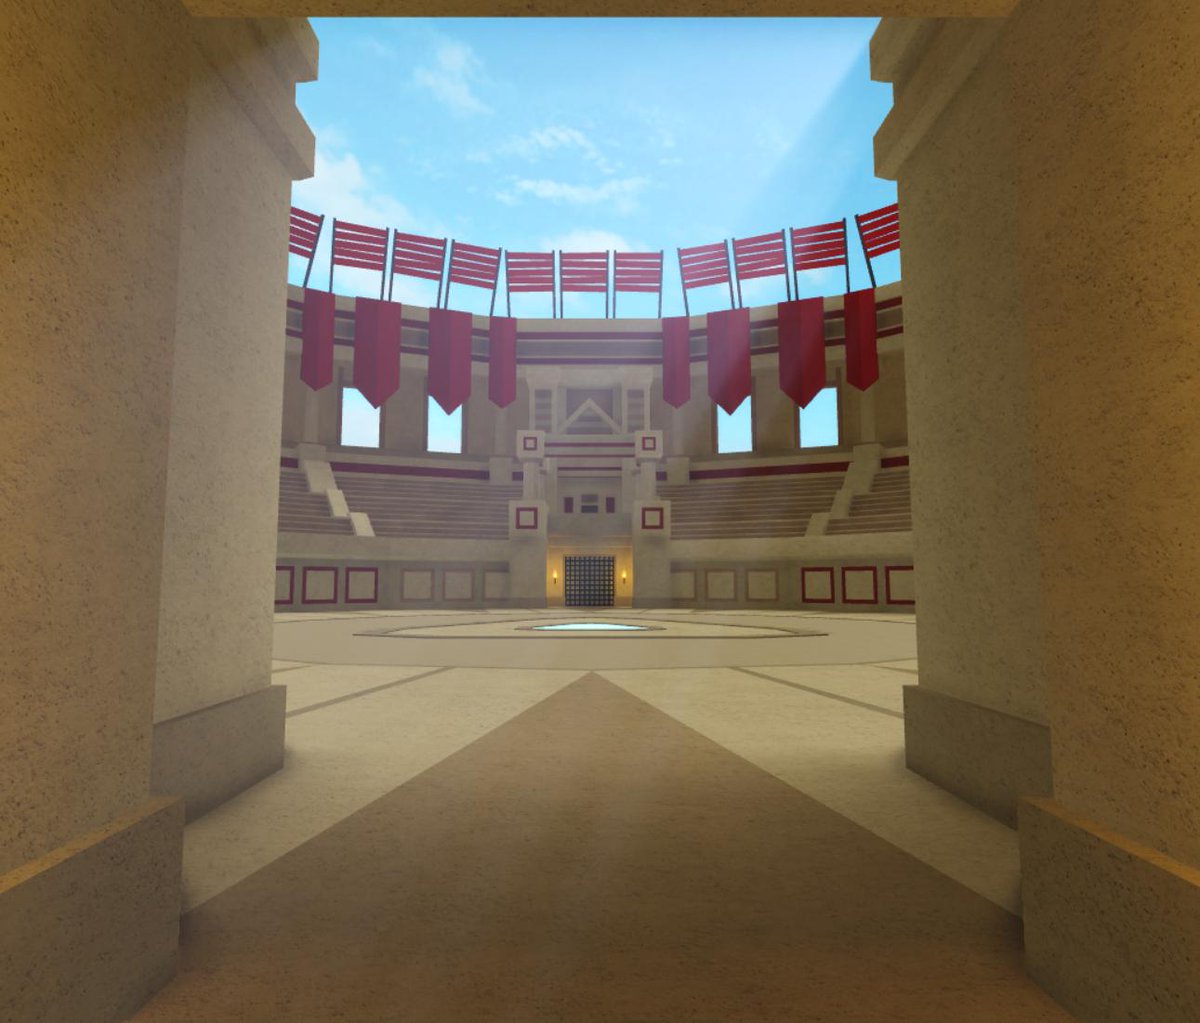 Llama Train Studio On Twitter Here S An Early Look At The Battle Colosseum We Ll Post A Release Date For Pvp As Soon As We Know When It Will Be Ready Https T Co Alepynmhop - roblox llama train studio twitter